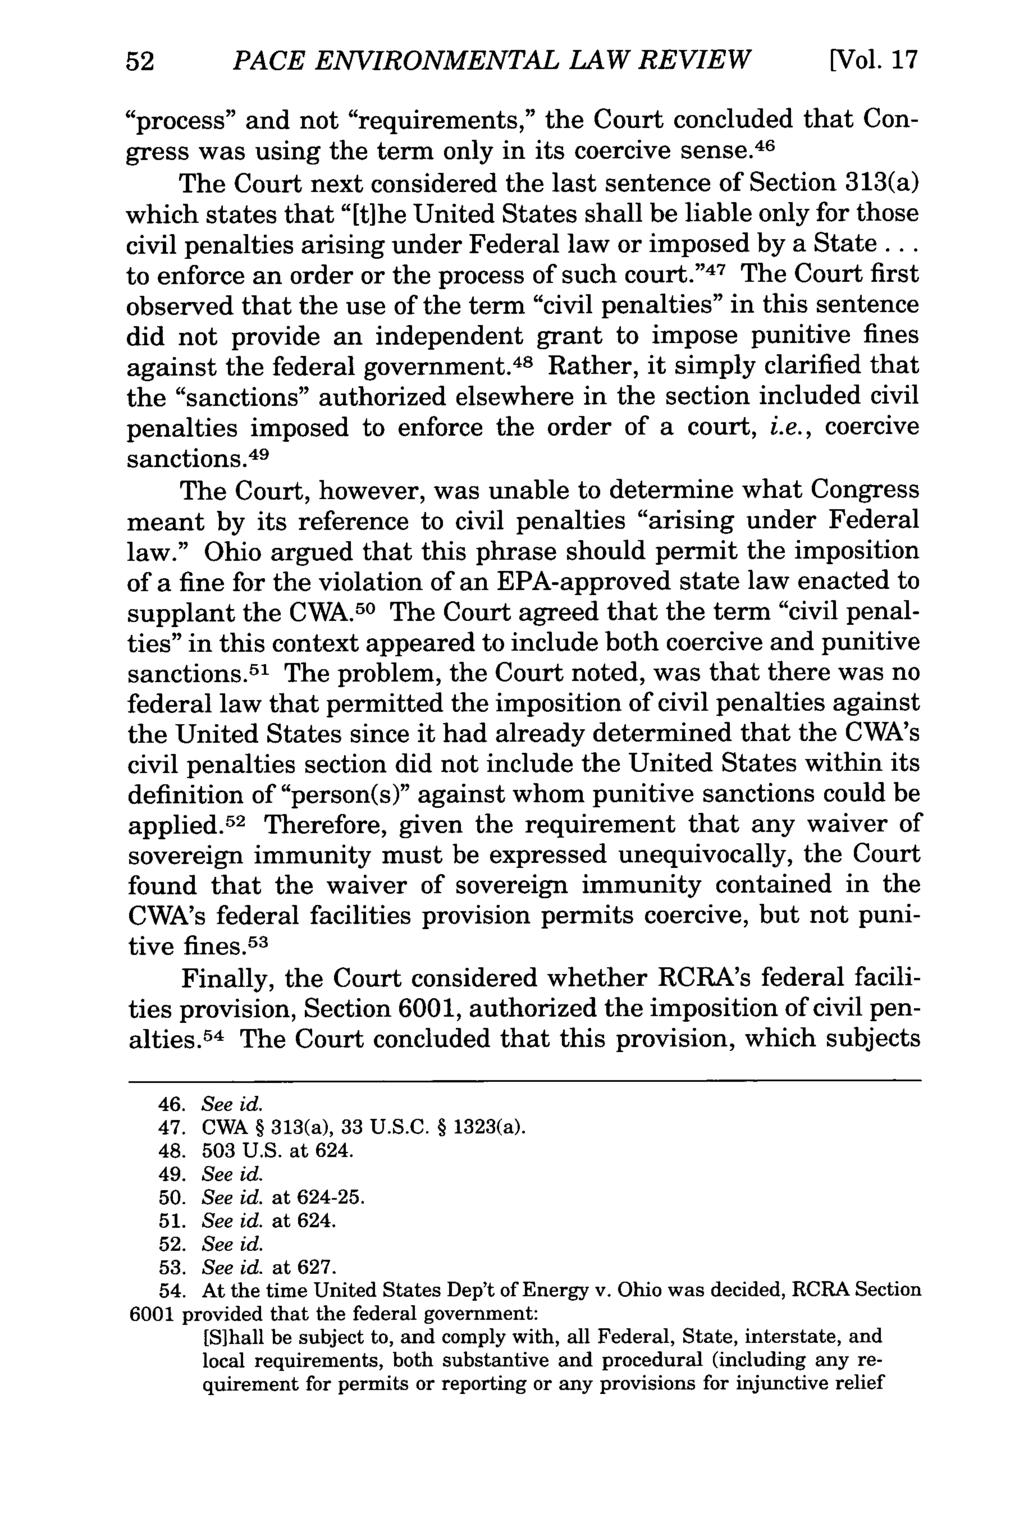 52 PACE ENVIRONMENTAL LAW REVIEW [Vol. 17 "process" and not "requirements," the Court concluded that Congress was using the term only in its coercive sense.